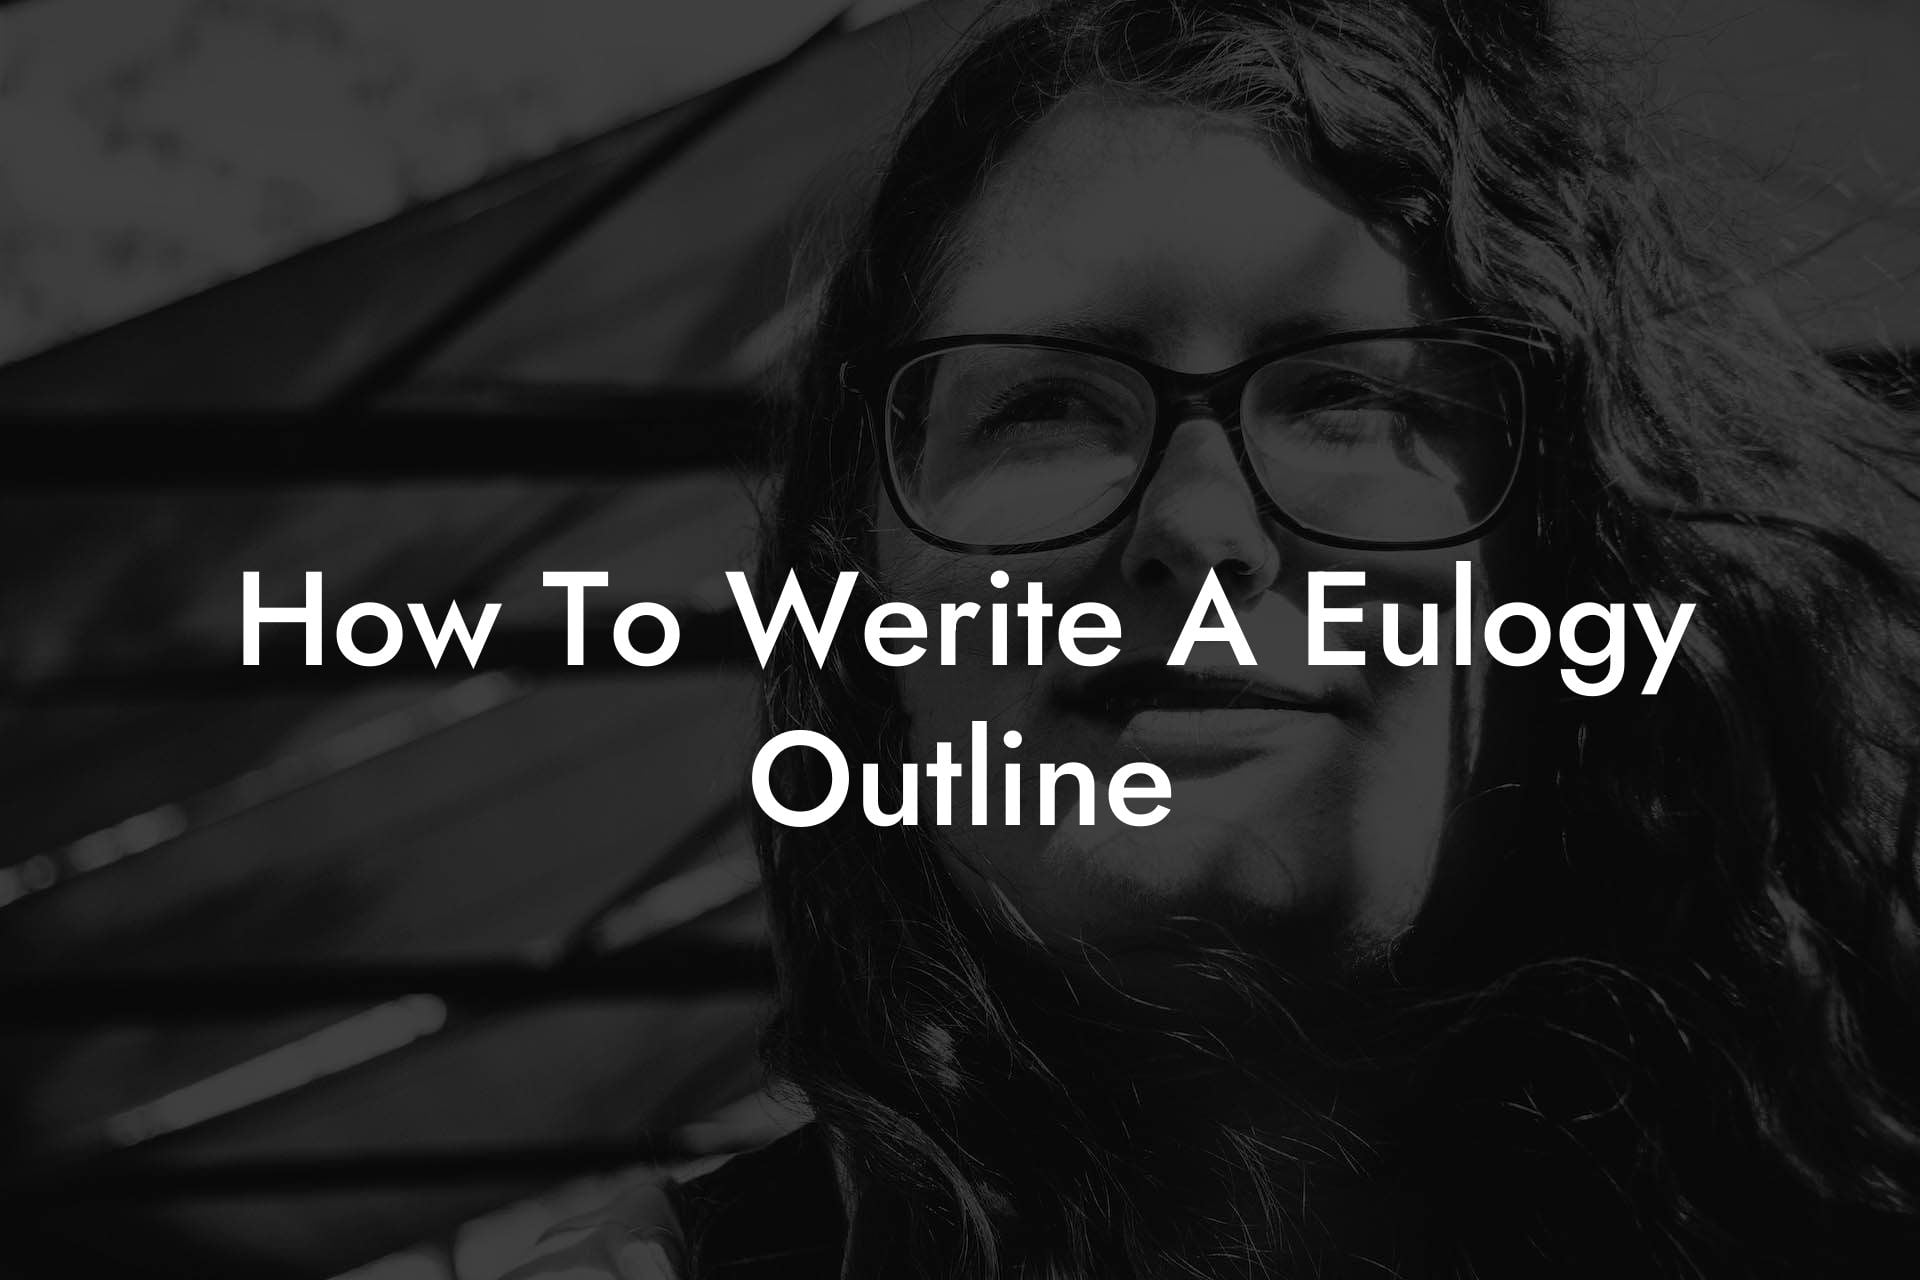 How To Werite A Eulogy Outline